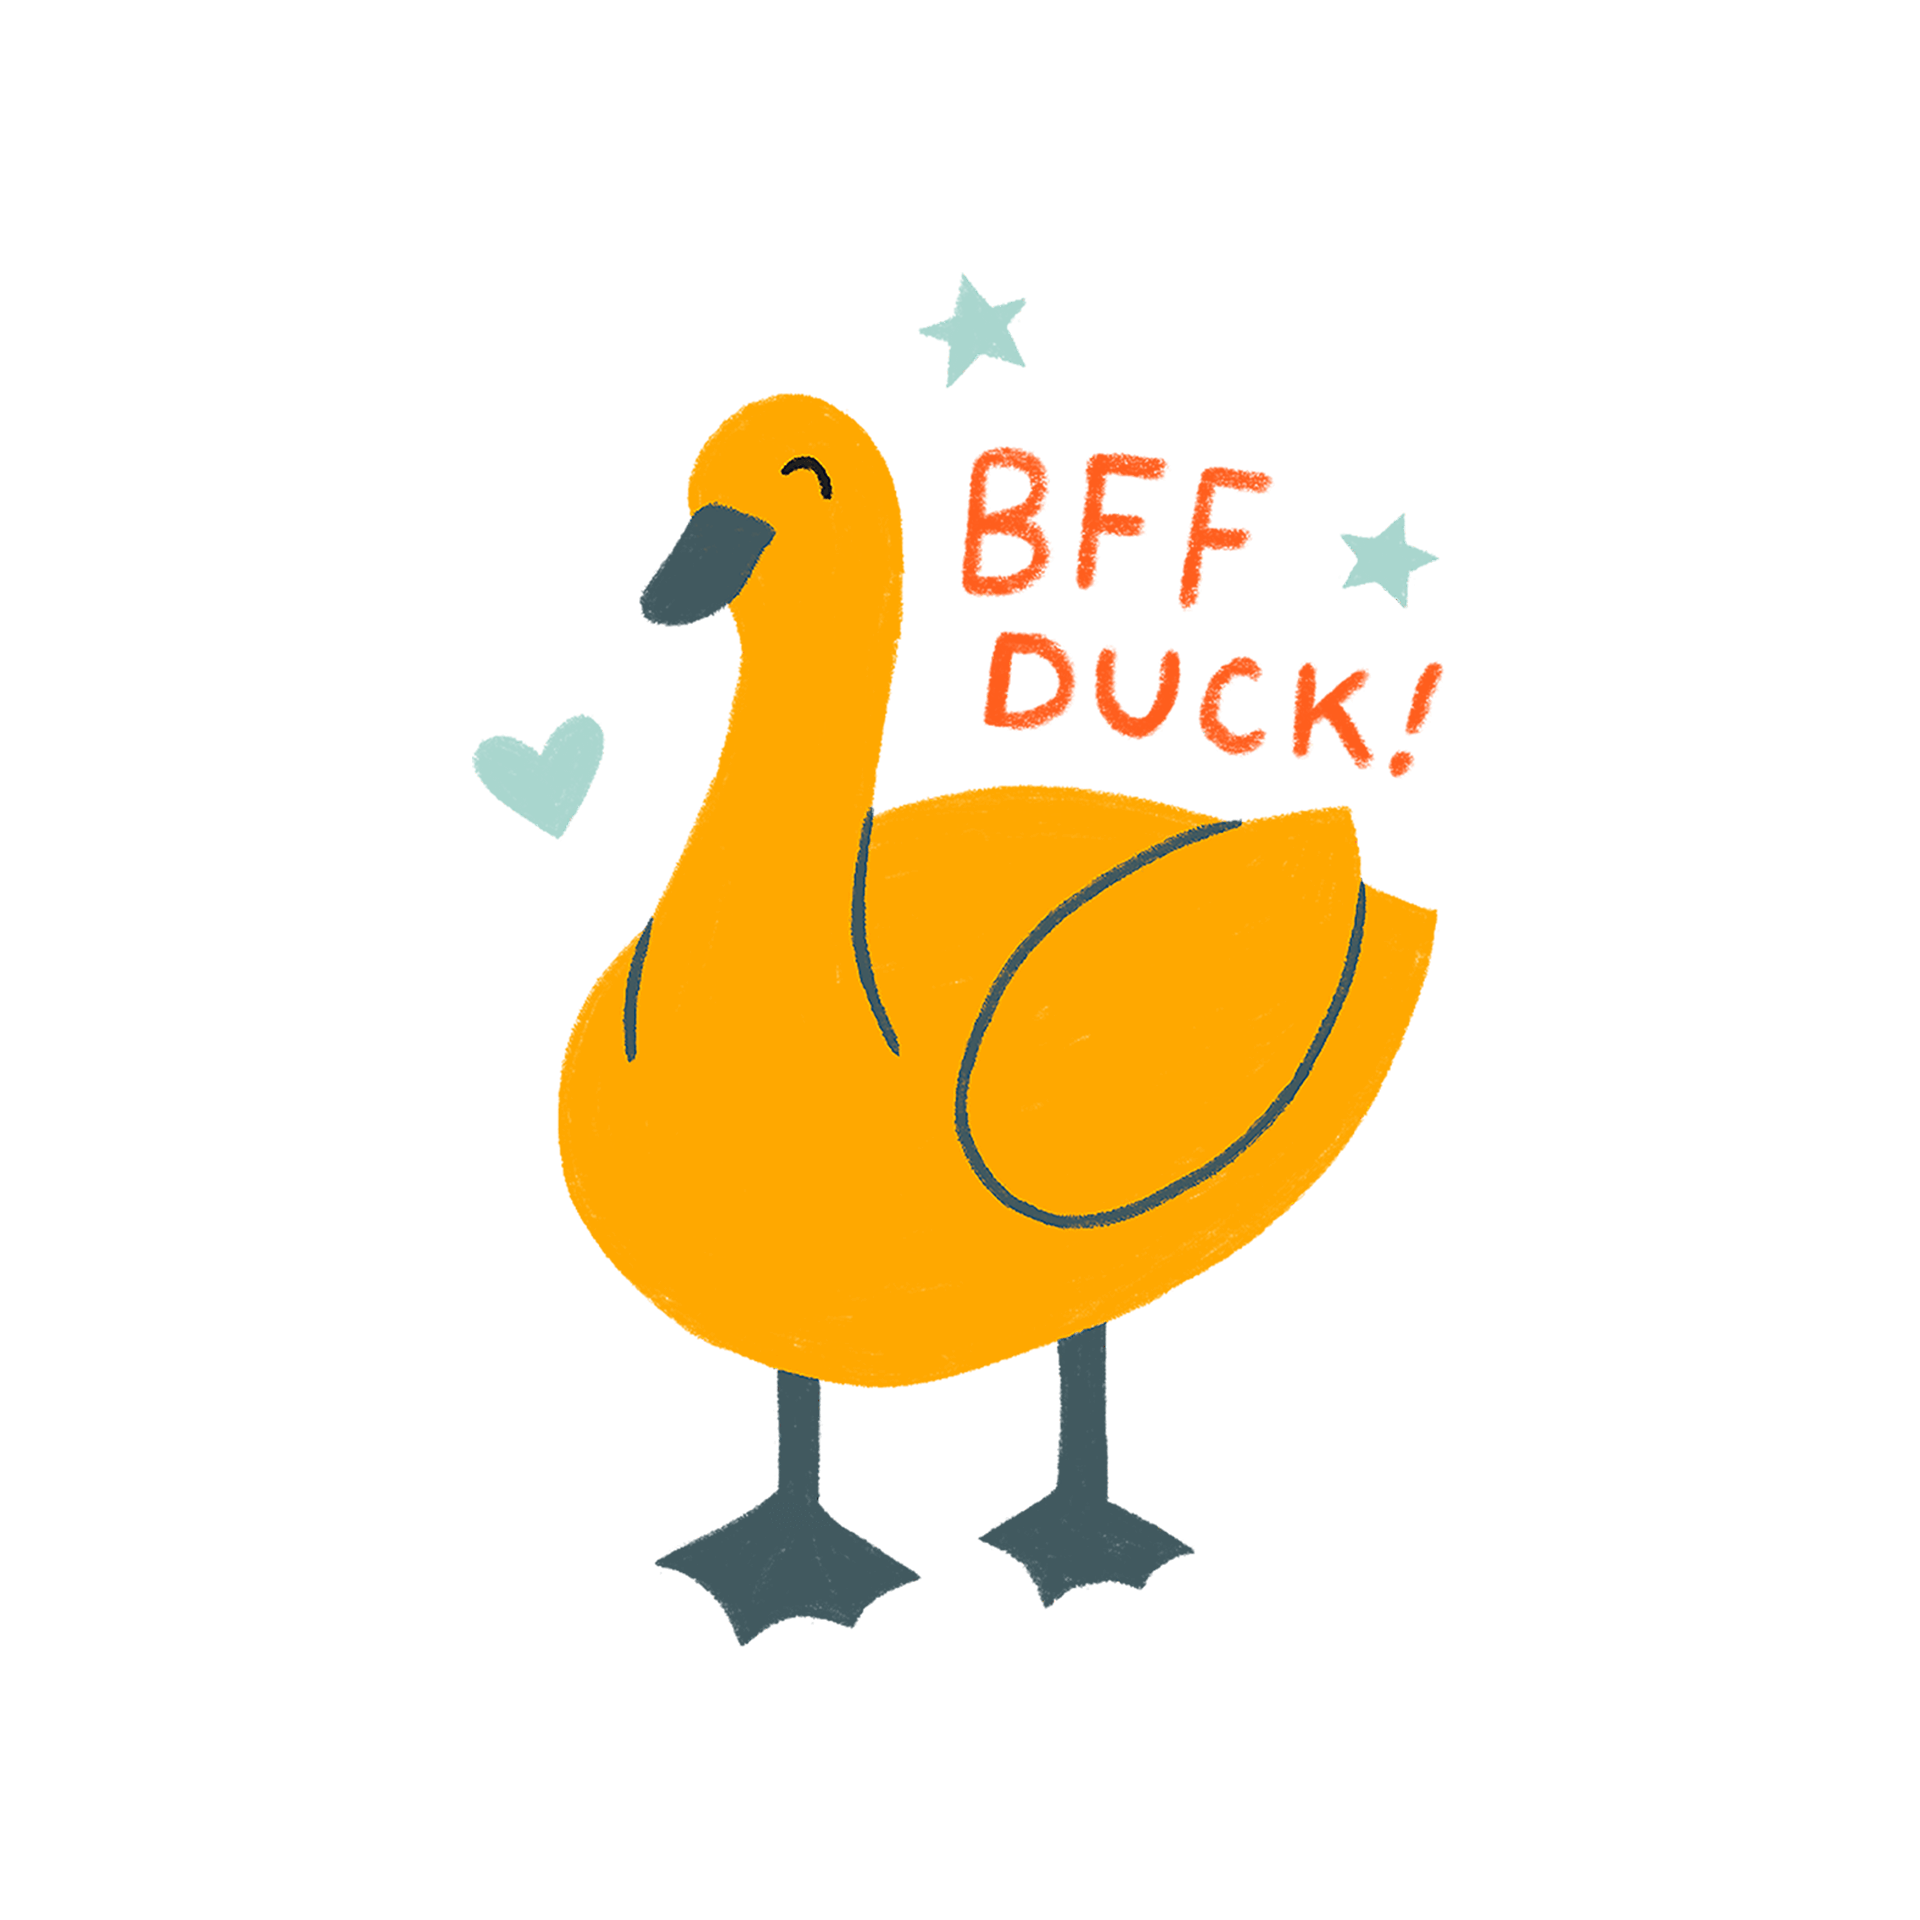 An illustration of a smiling yellow duck with the words 